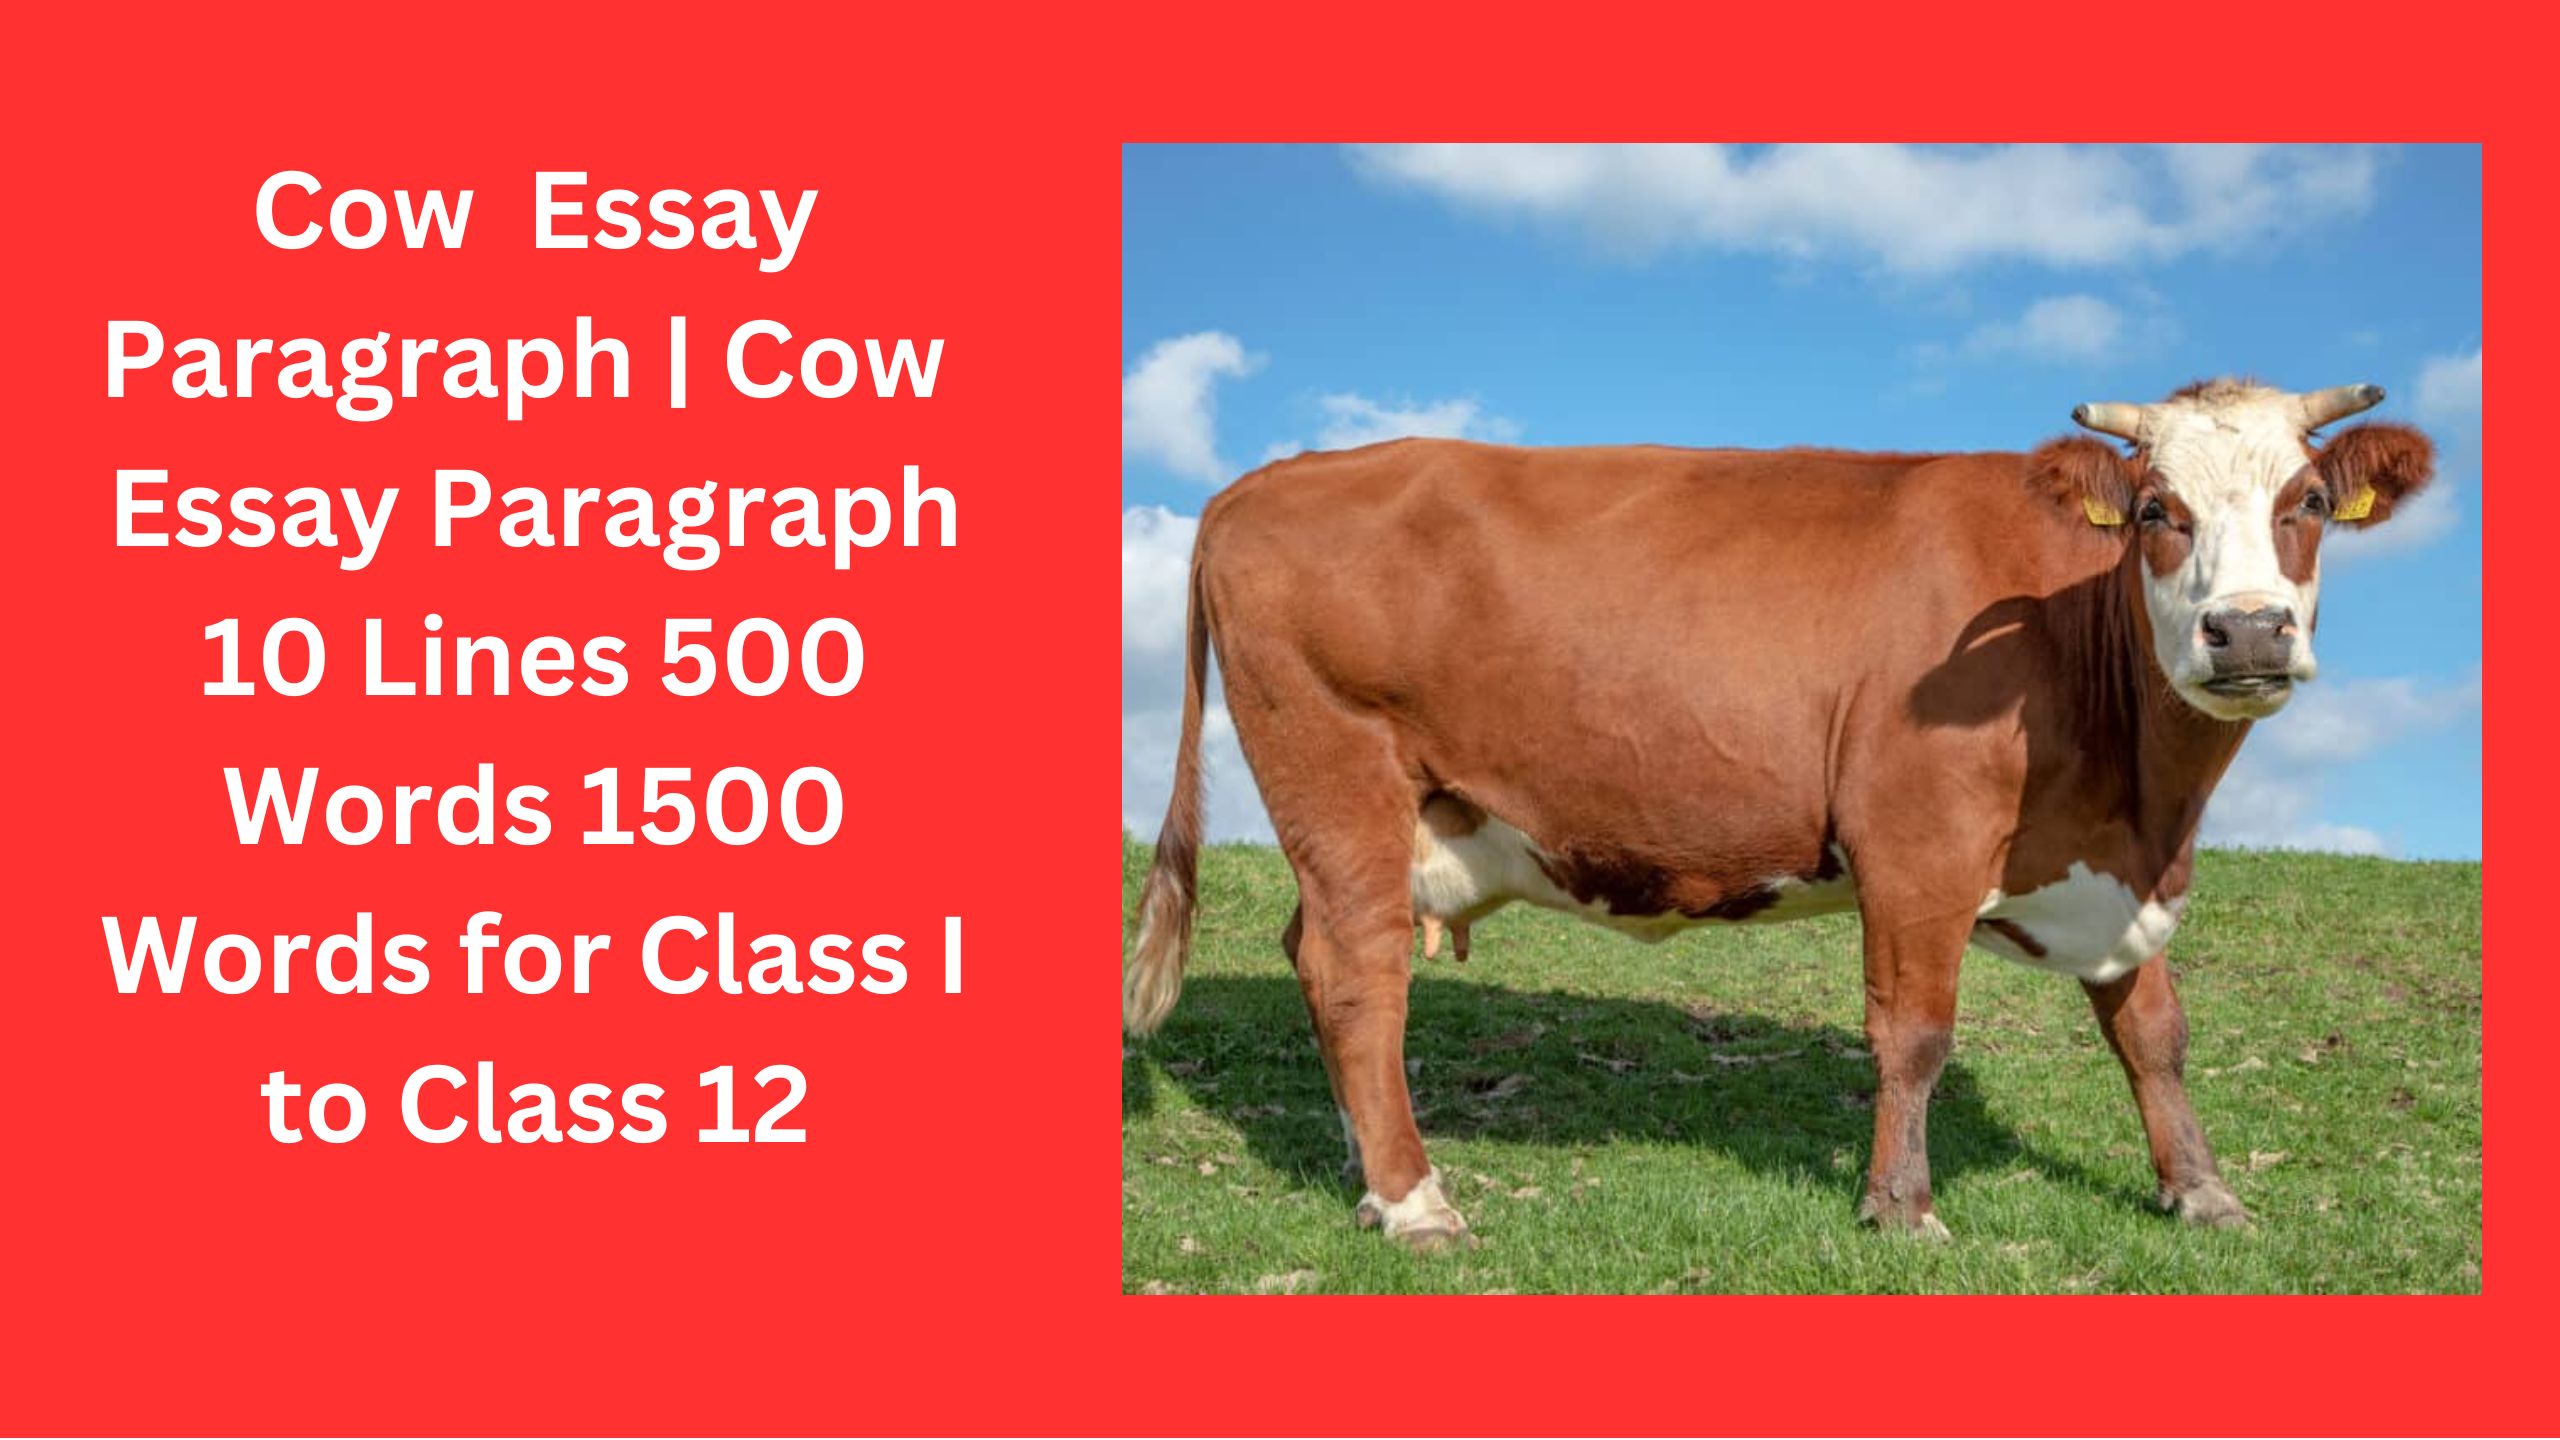 You are currently viewing Cow Essay Paragraph | Cow Essay Paragraph 10 Lines 500 Words 1500 Words